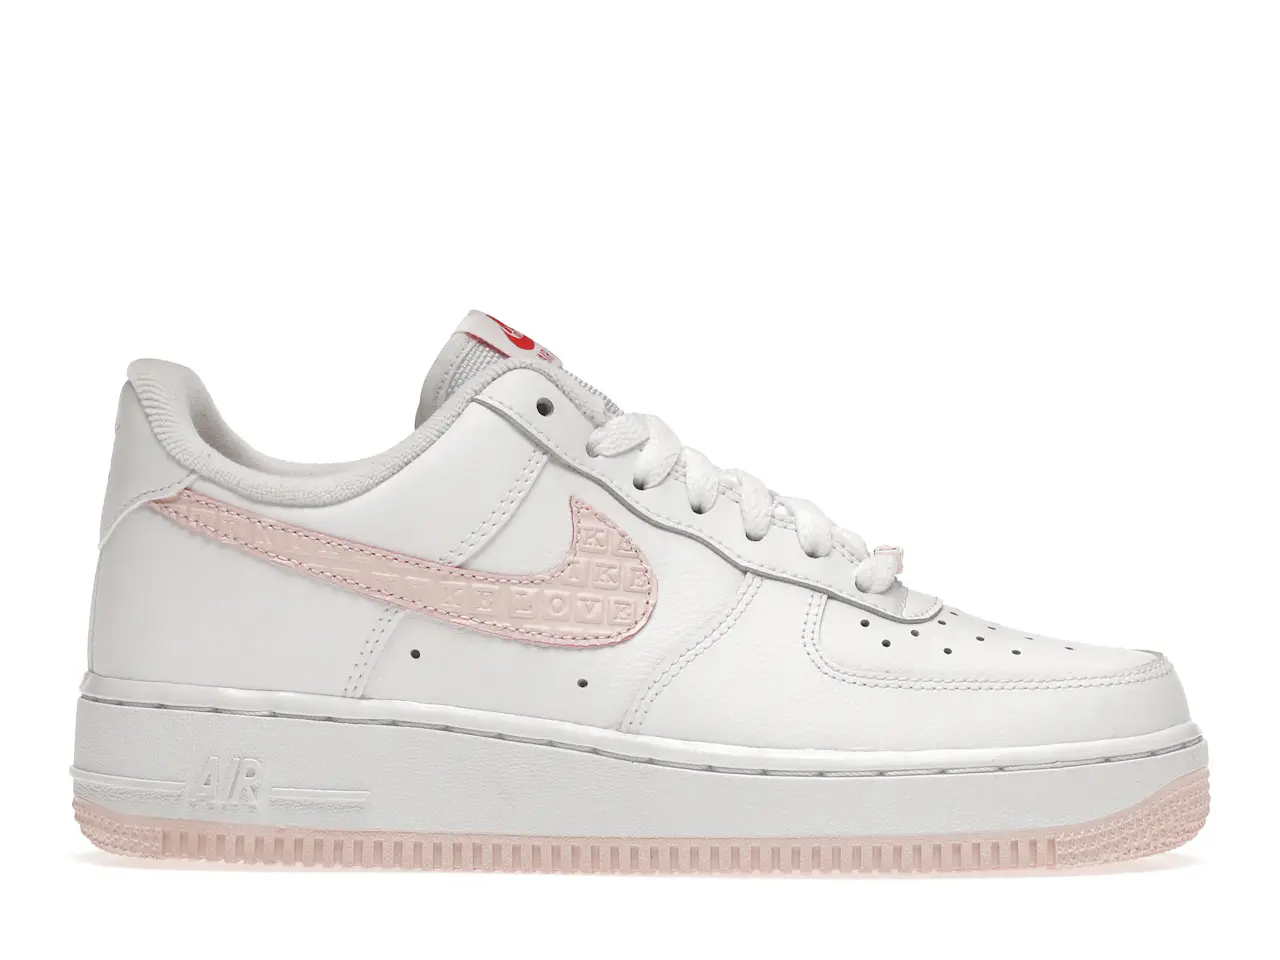 Nike Air Force 1 Low VD Valentine's Day (2022) (Women's) - DQ9320-100 - US